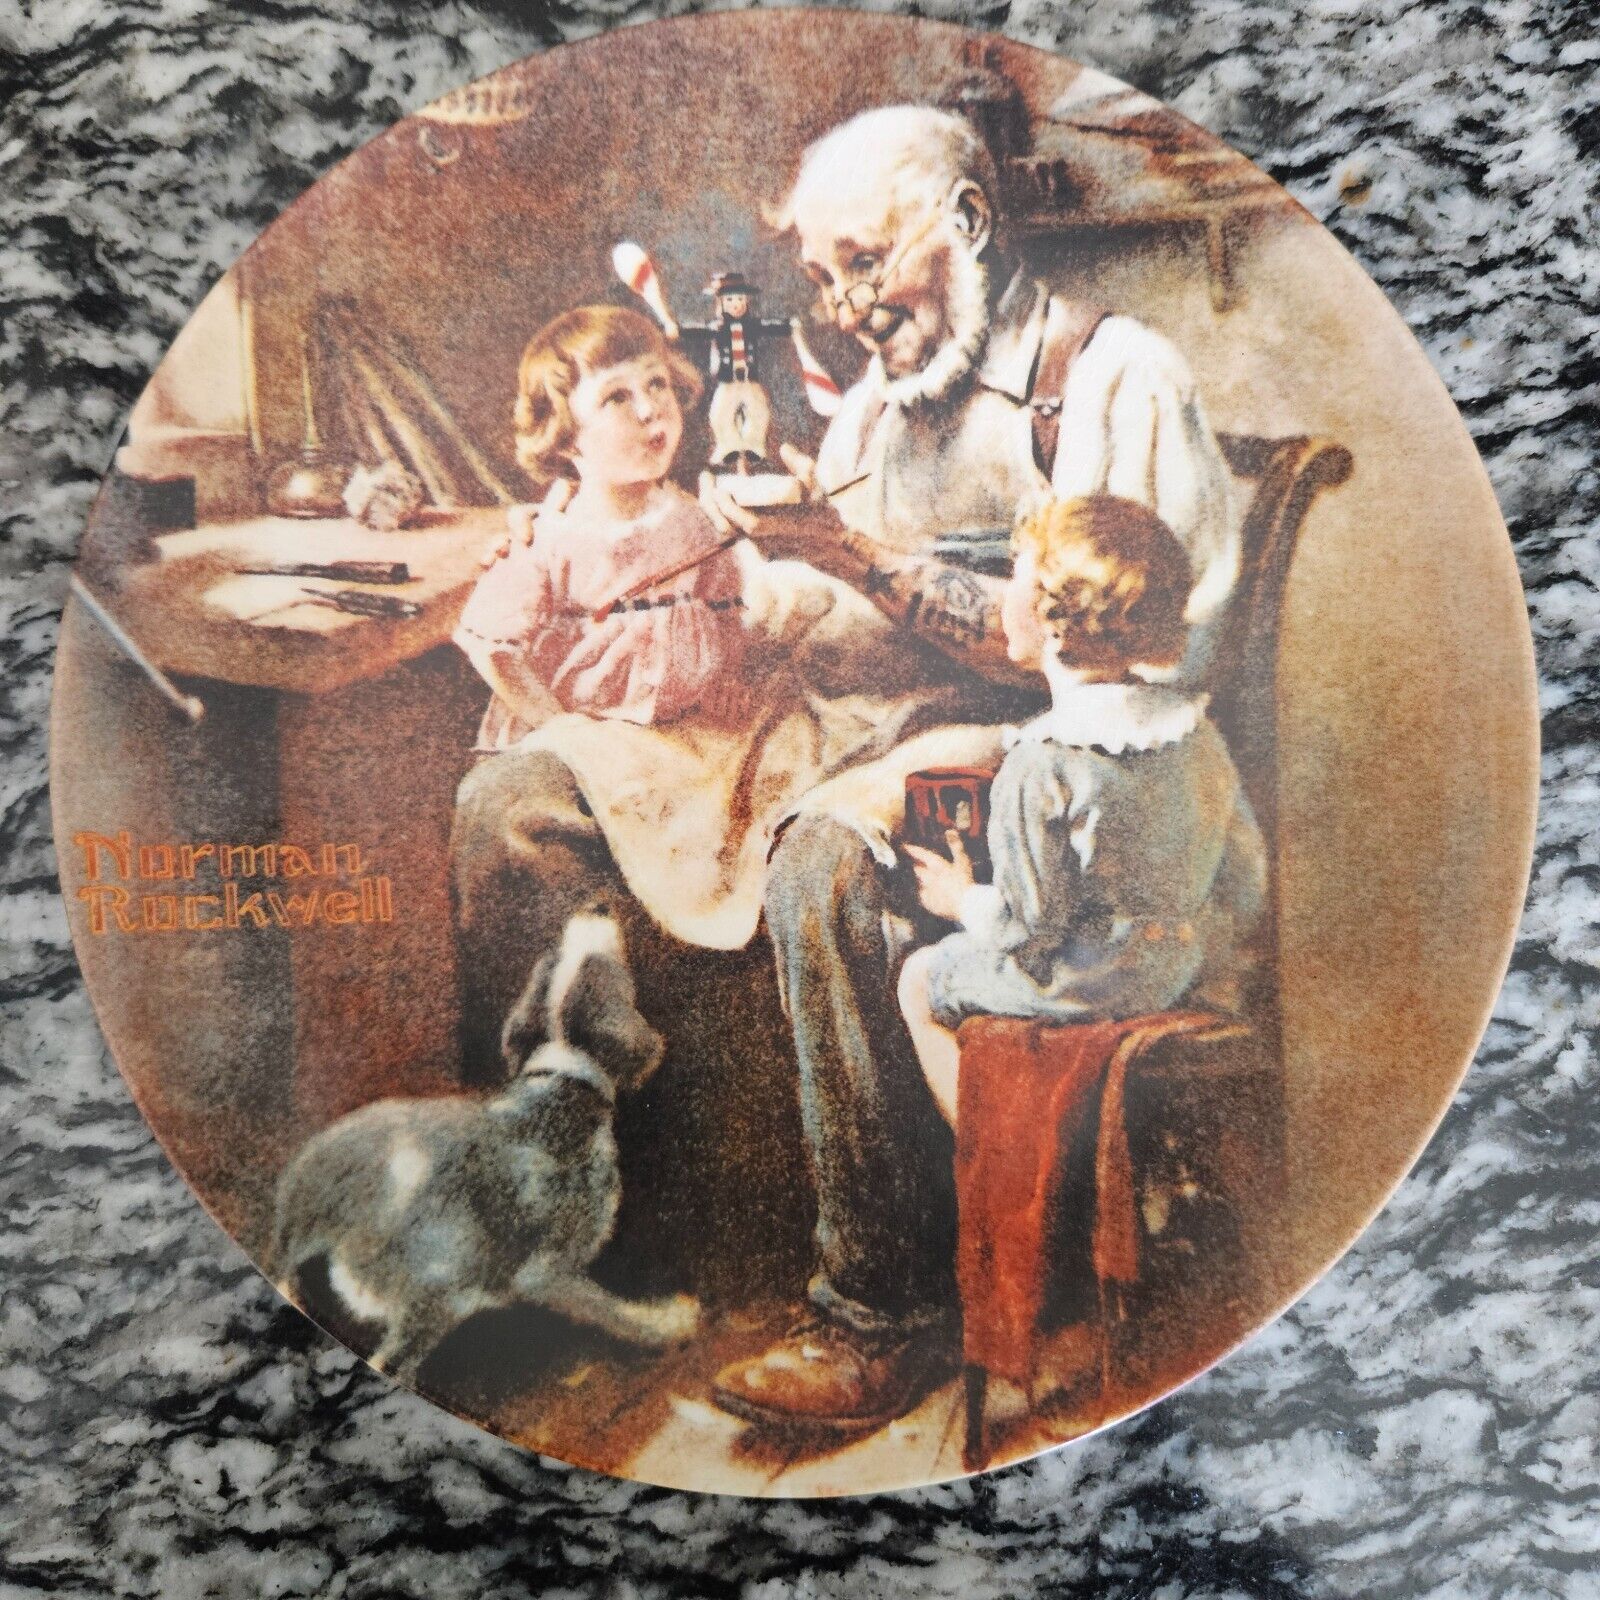 Norman Rockwell-“The Toy Maker” Collector Plate 1977 Limited Edition Knowles